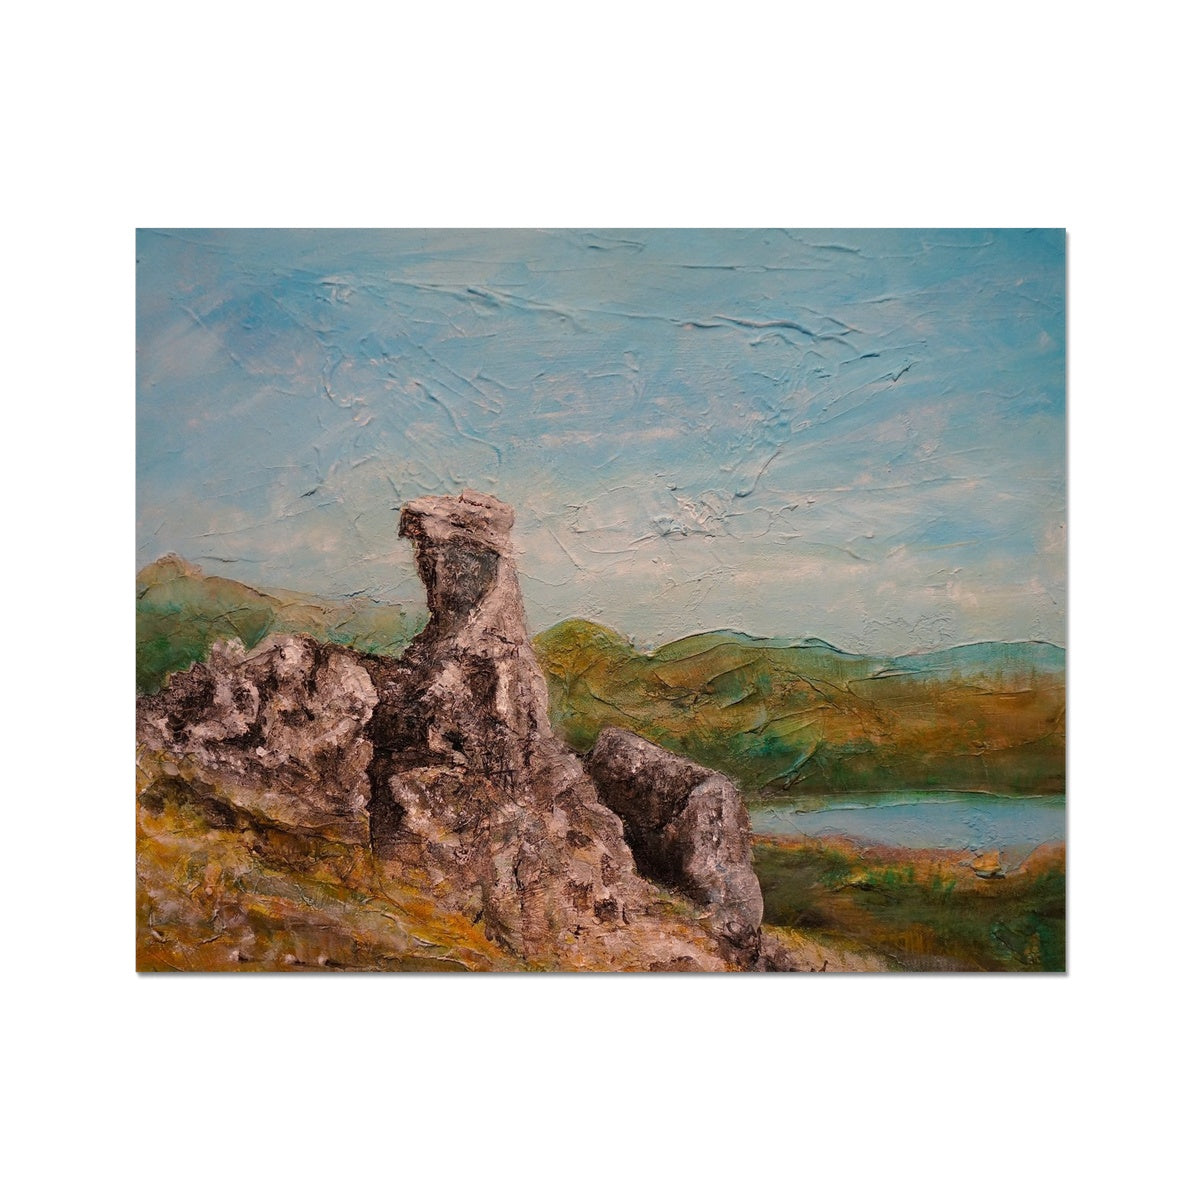 The Cobbler ii Painting | Artist Proof Collector Prints From Scotland-Artist Proof Collector Prints-Scottish Lochs & Mountains Art Gallery-20"x16"-Paintings, Prints, Homeware, Art Gifts From Scotland By Scottish Artist Kevin Hunter